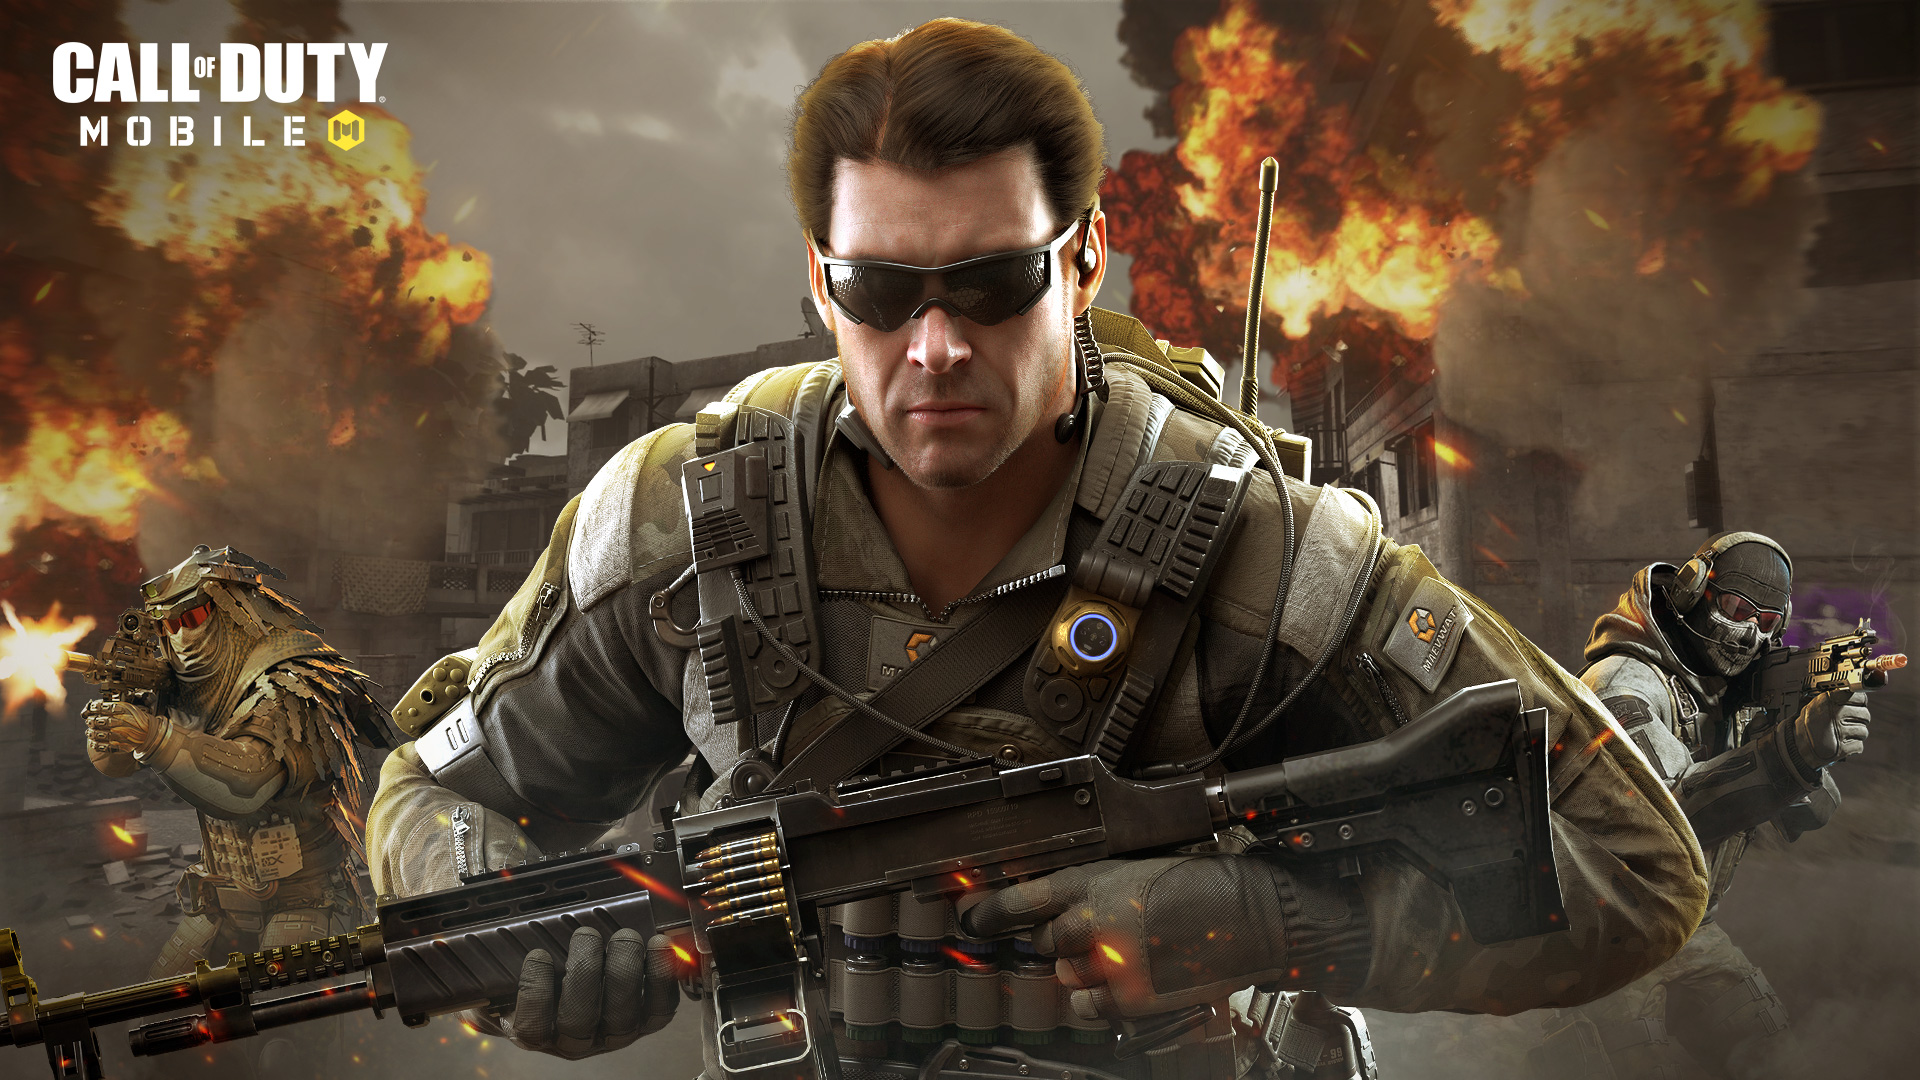 Call Of Duty: Mobile Vs Call Of Duty: Warzone - Which Free Game Is Better?